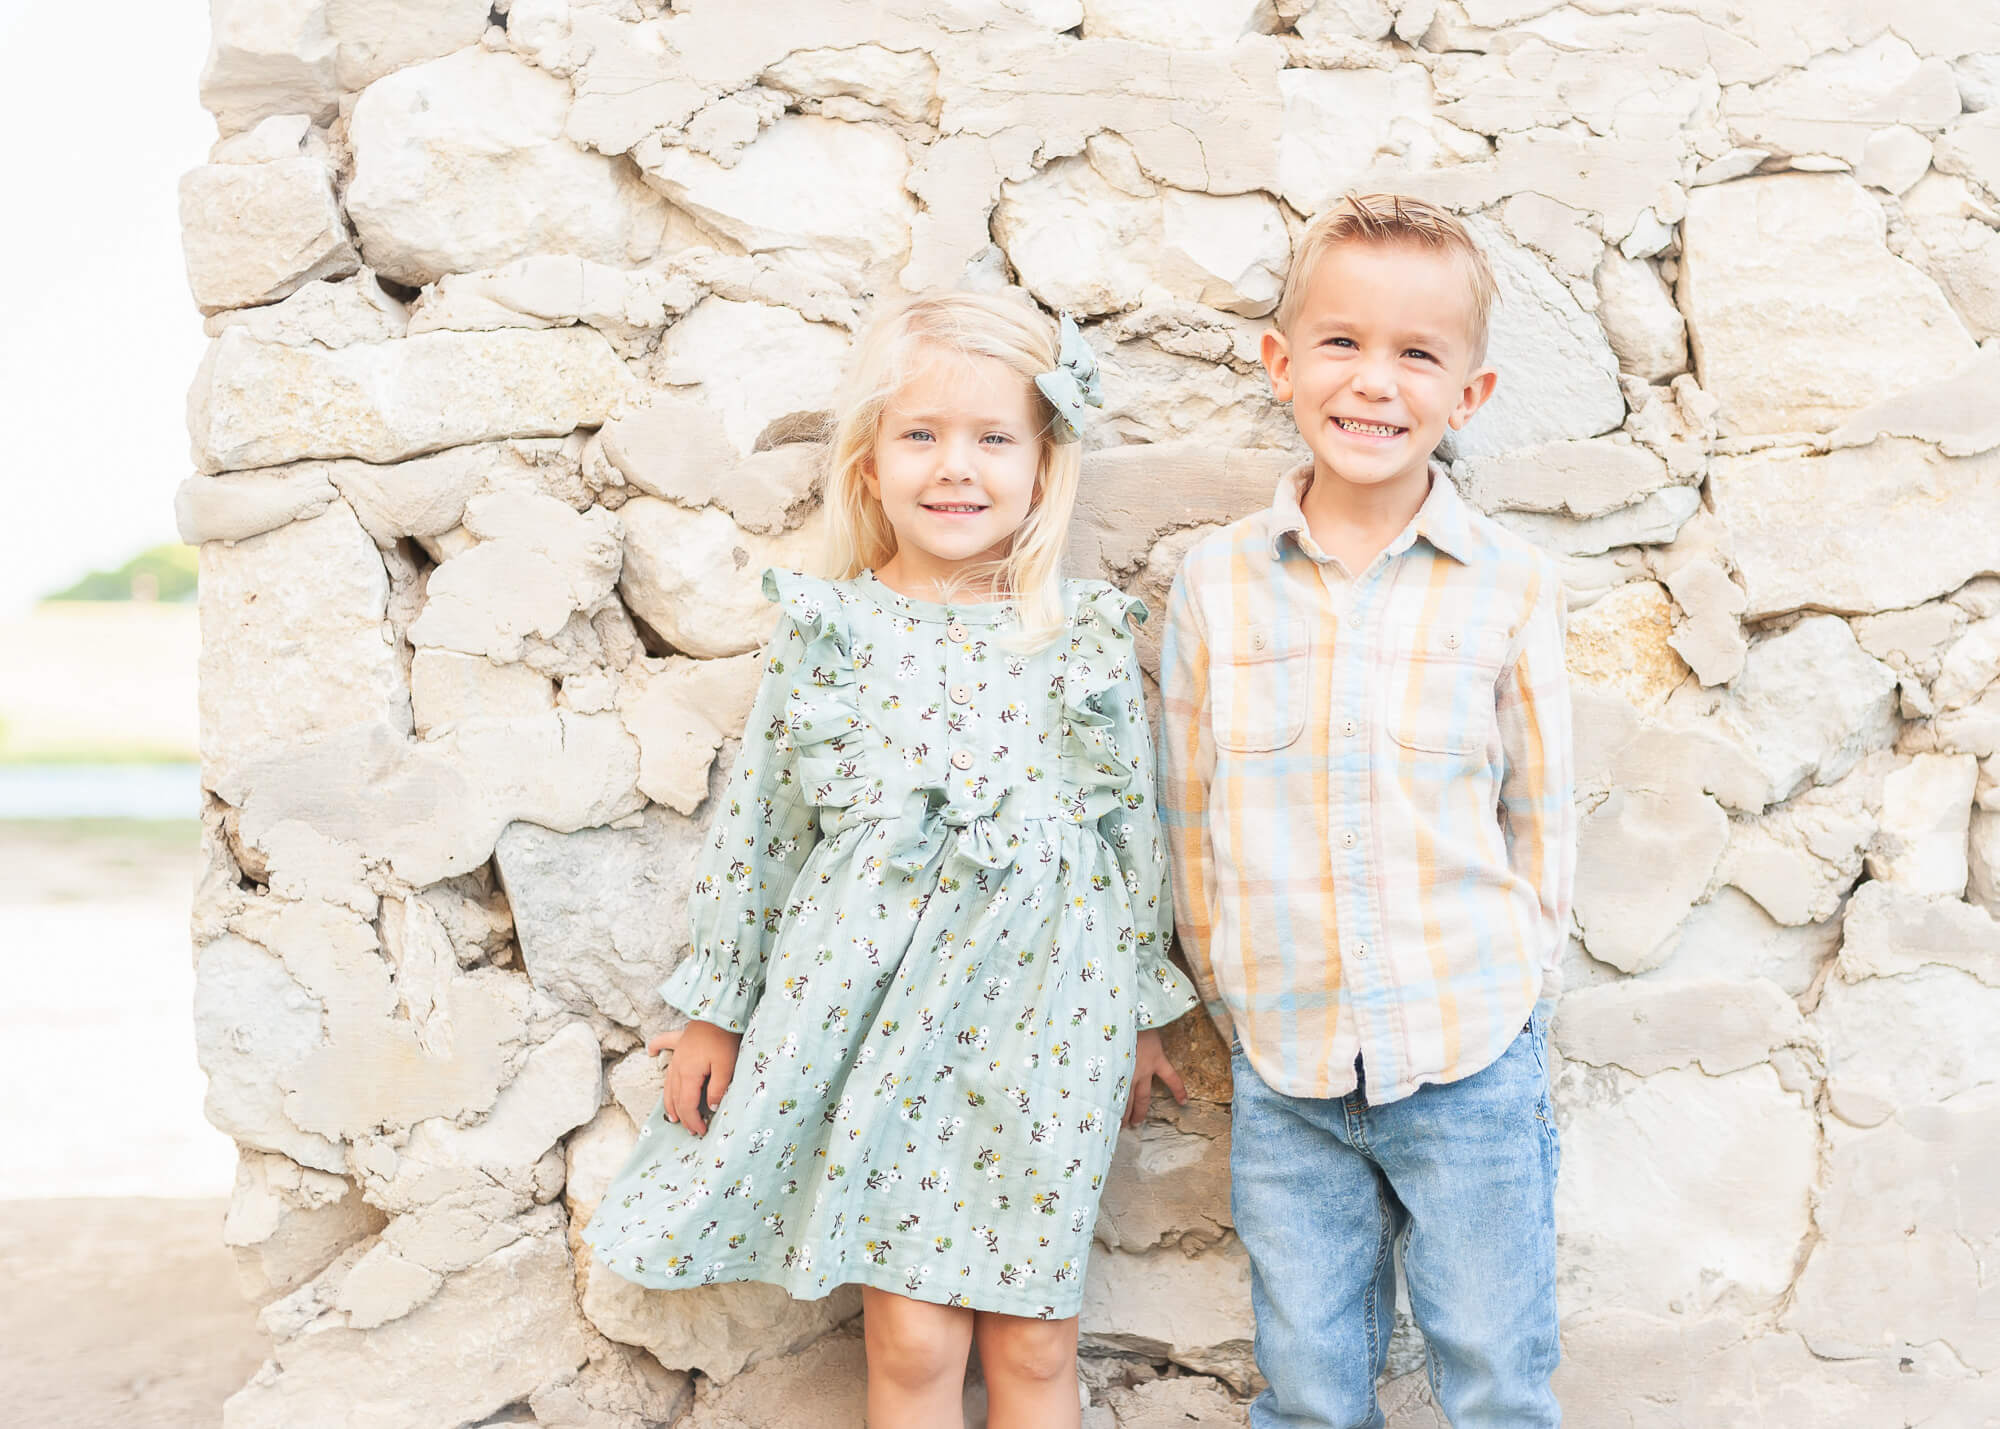 Gorgeous well-dressed kiddos against stone wall